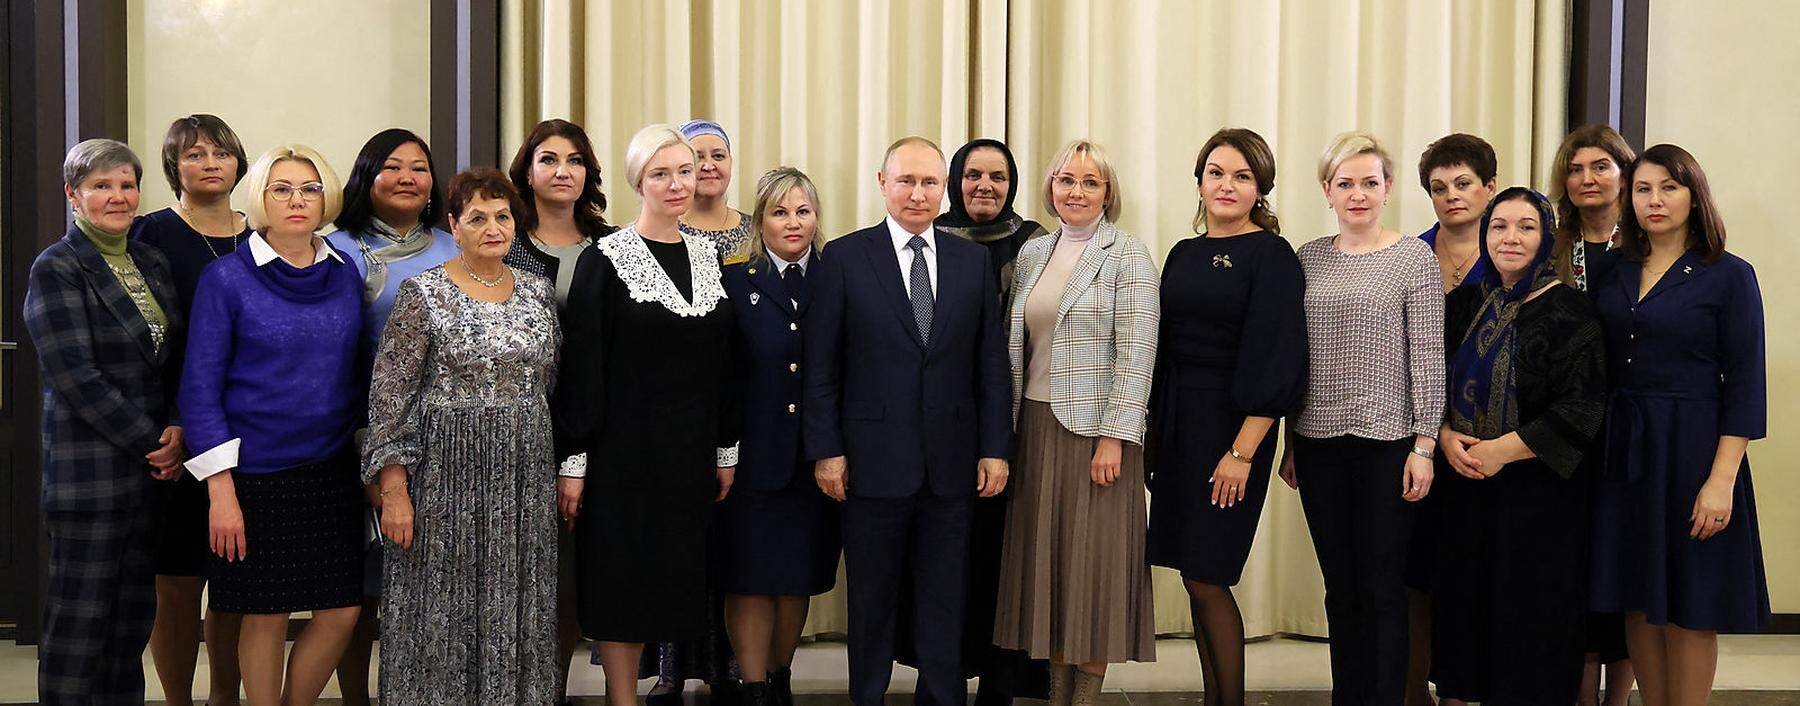 Russia's President Vladimir Putin meets with mothers of Russian servicemen participating in Russia-Ukraine conflict, outside Moscow